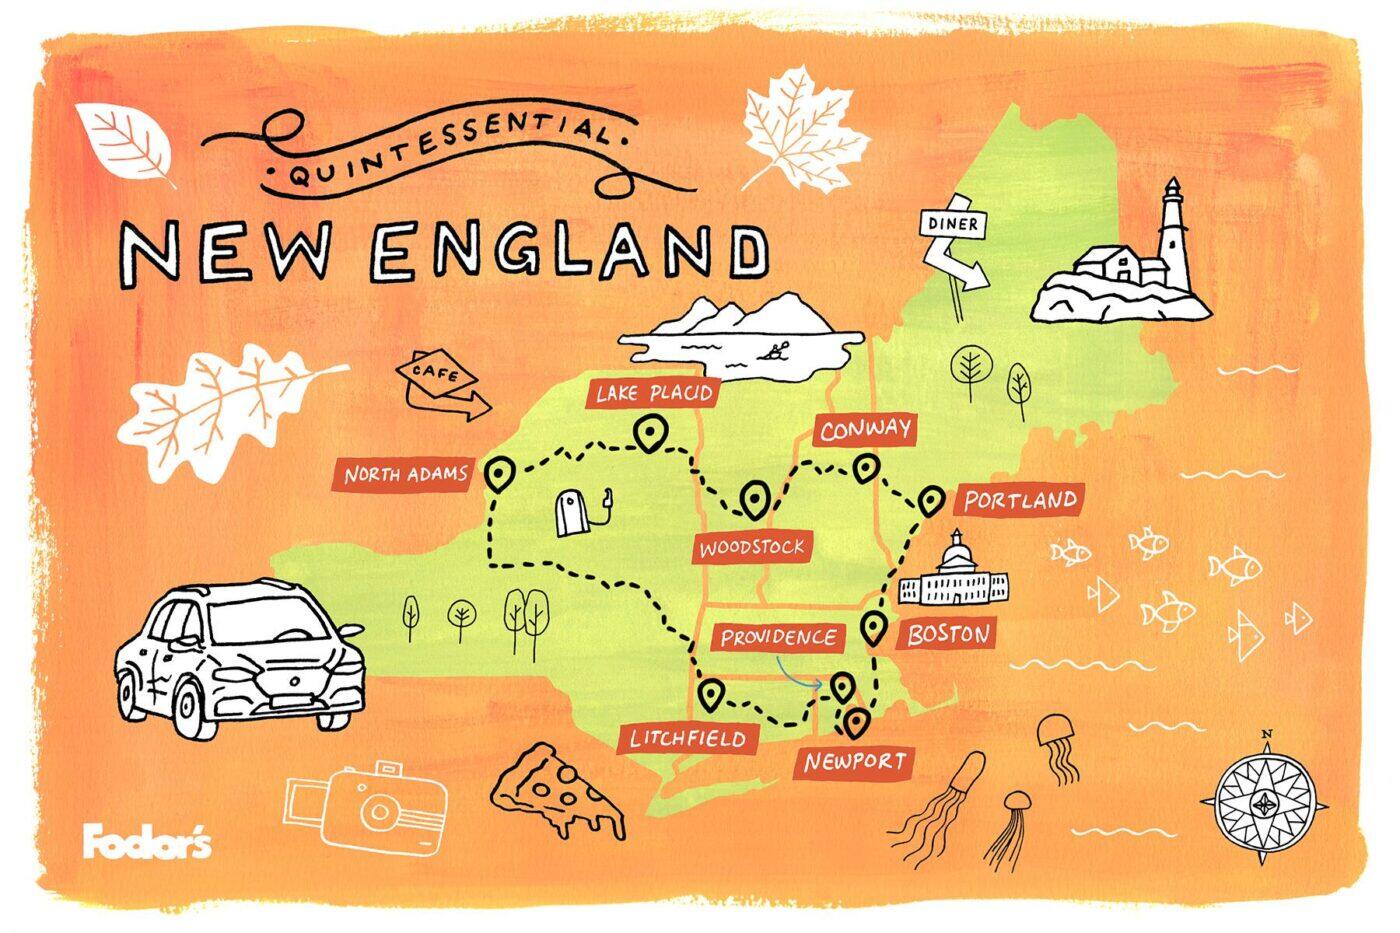 tour new england states by car